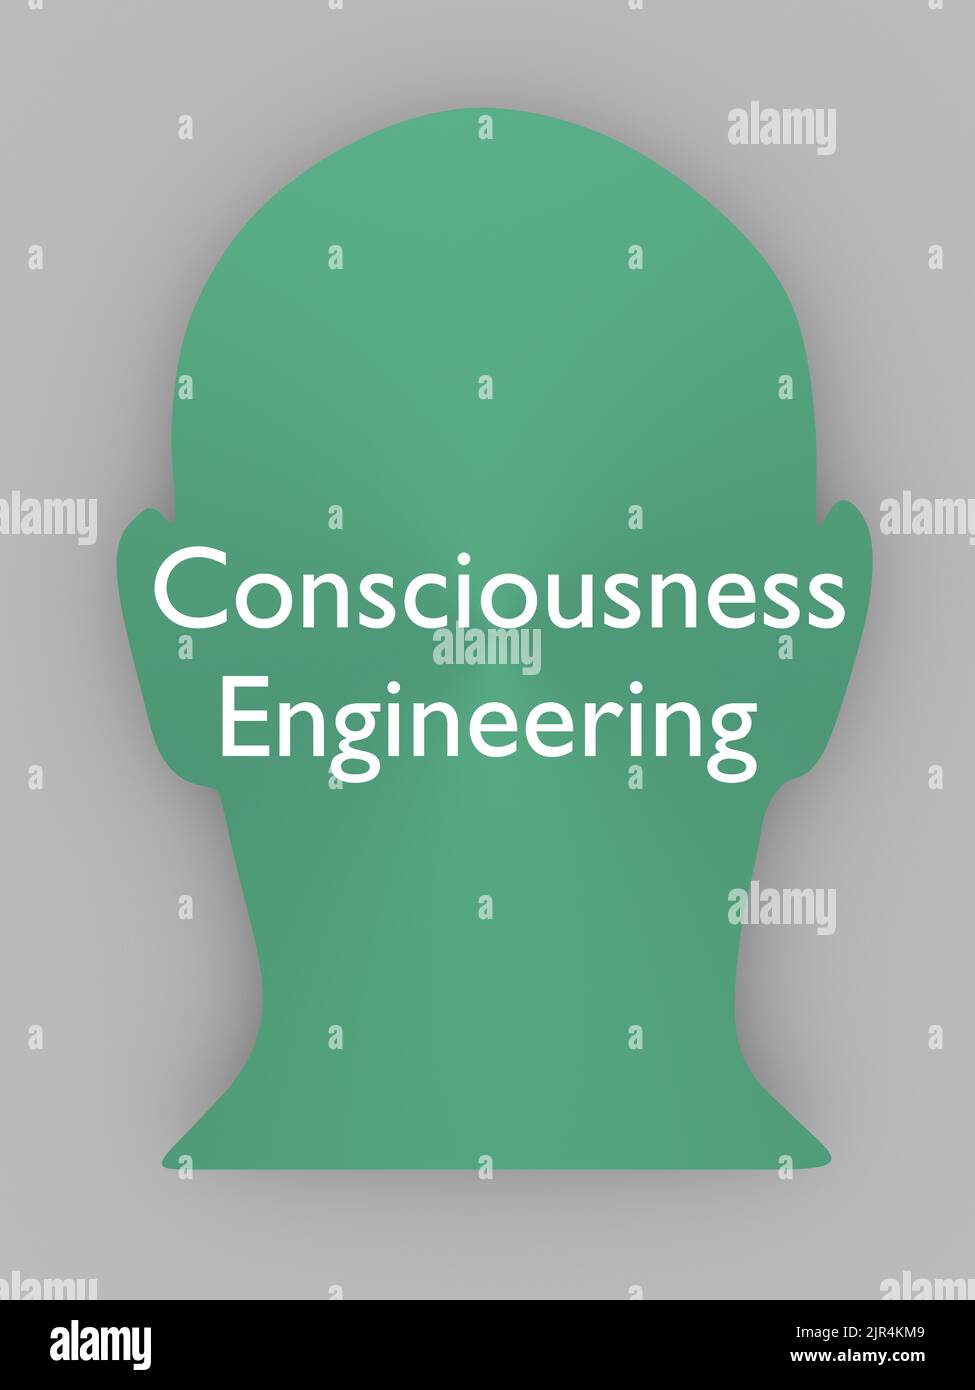 3D illustration of Consciousness Engineering on a green head silhouette, isolated over gray background. Stock Photo